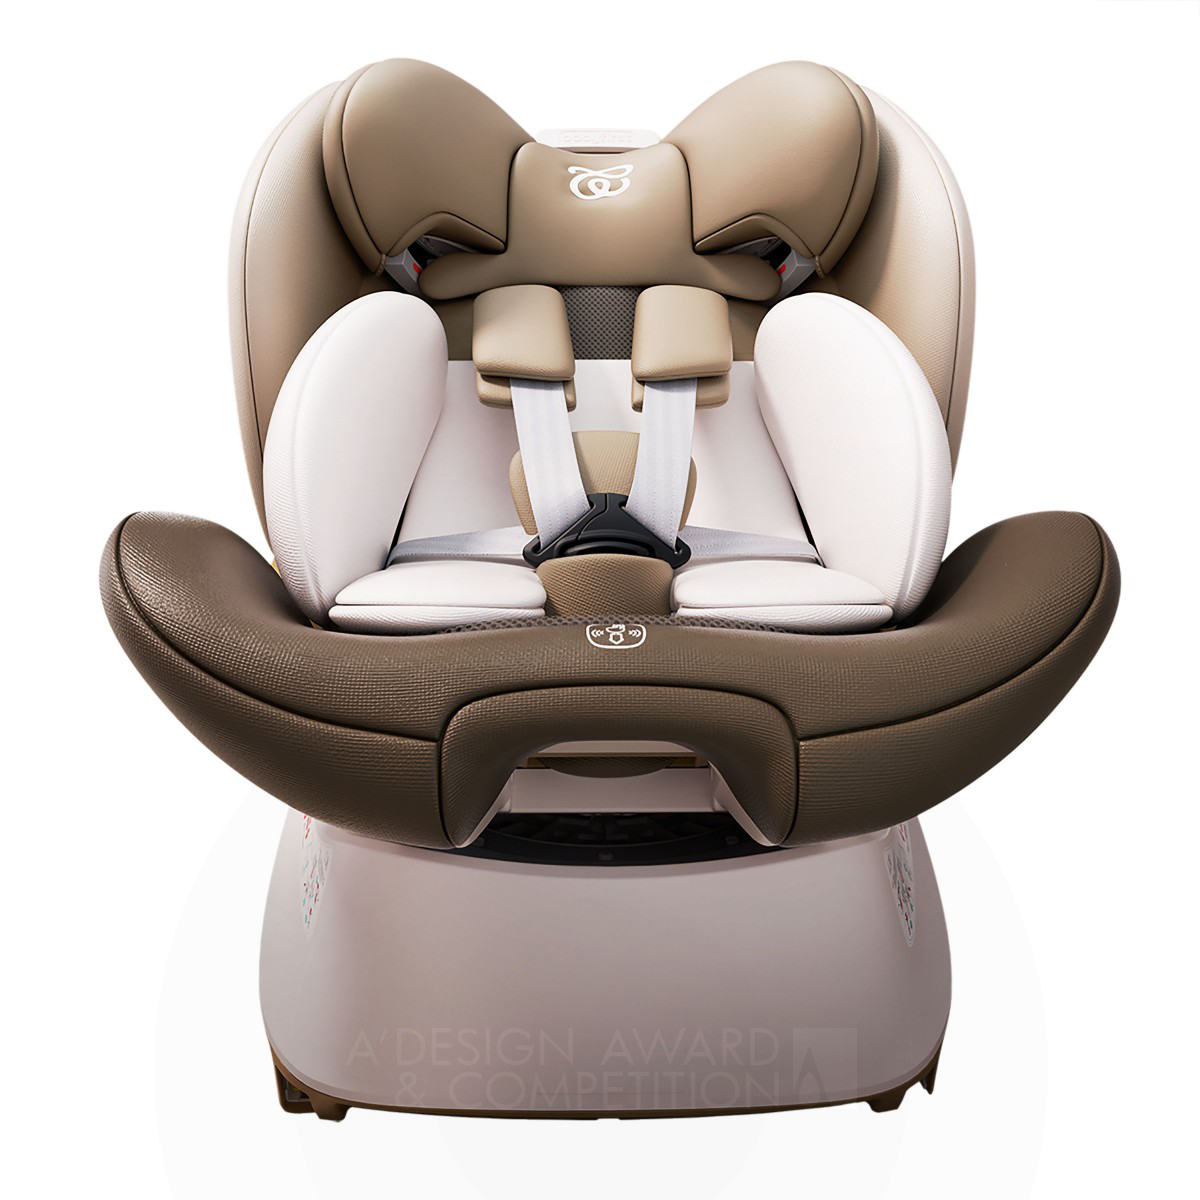 Ningbo Baby First Baby Products Co., Ltd wins Golden at the prestigious A' Baby, Kids and Children's Products Design Award with Babyfirst Genius Pro R156 Safety Seats.